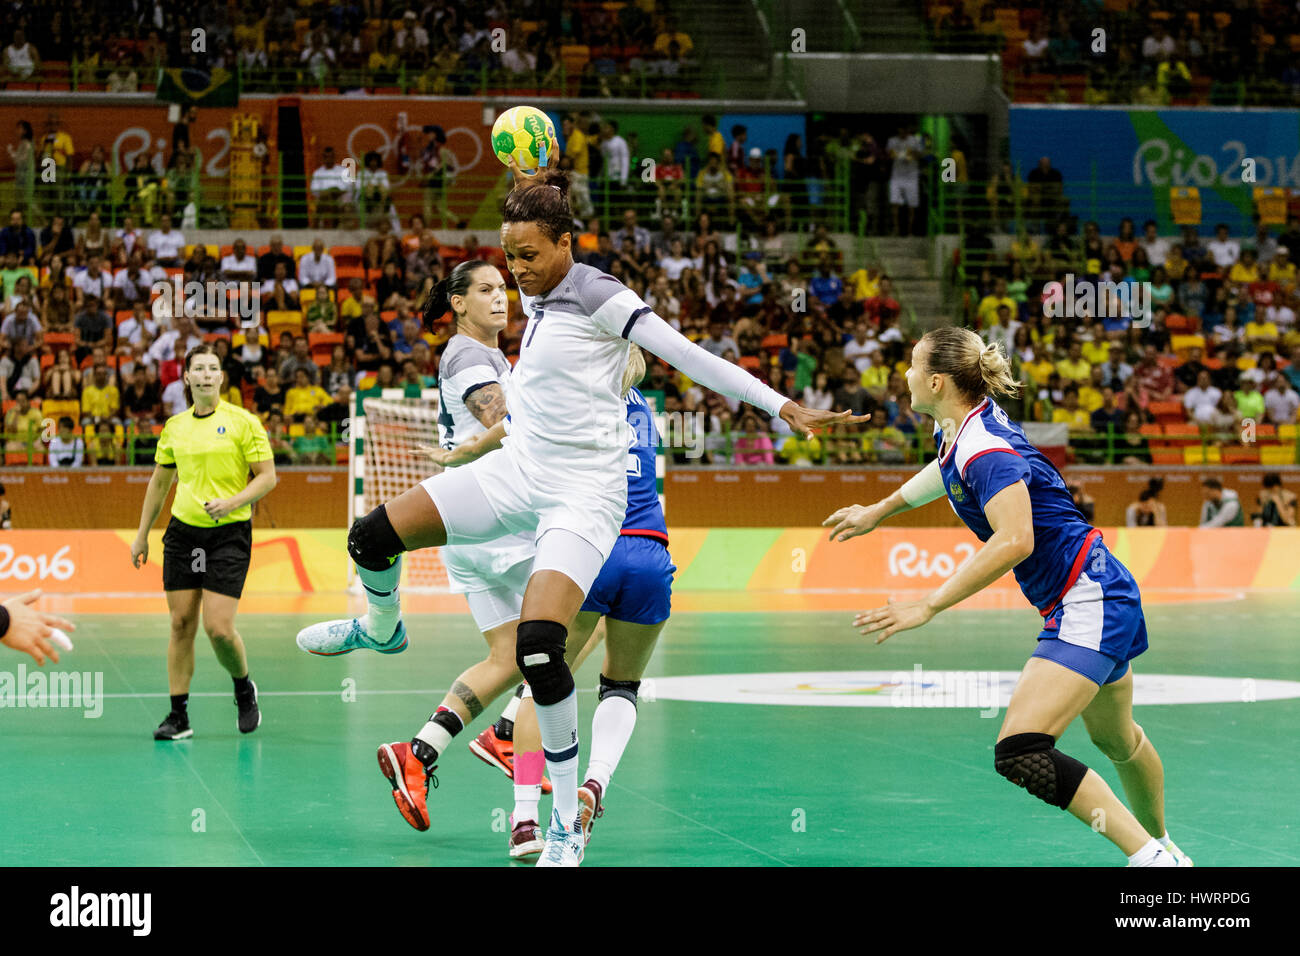 Rio de Janeiro, Brazil. 20 August 2016  Allison Pineau (FRA) #7 competes in the women's handball gold medal match Russia vs. France at the 2016 Olympi Stock Photo